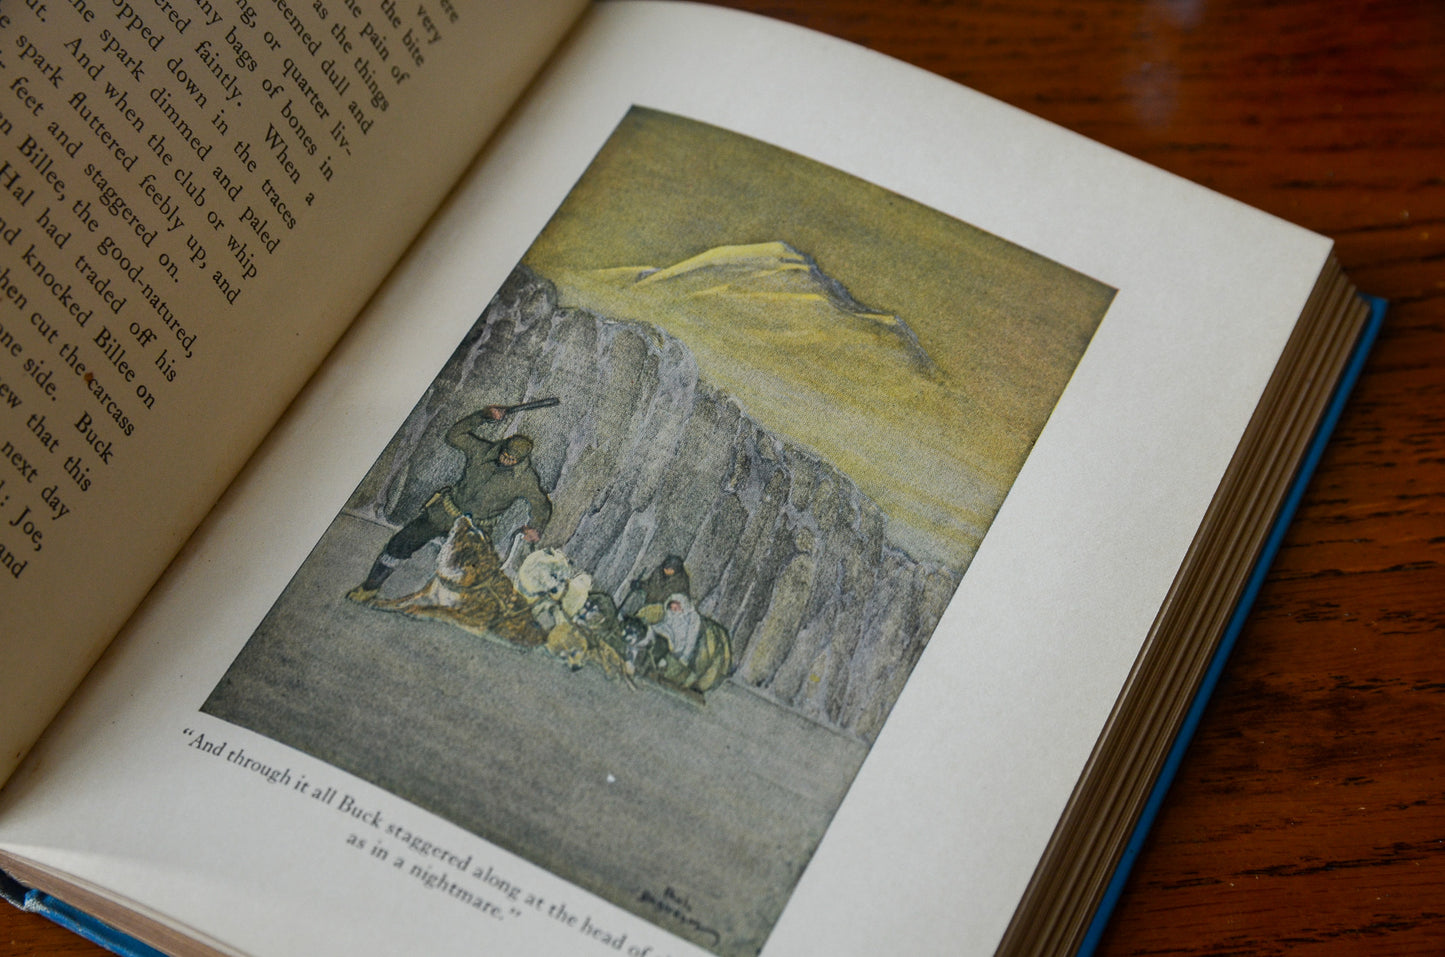 The Call of the Wild by Jack London / Illustrated by Paul Bransom / 1923